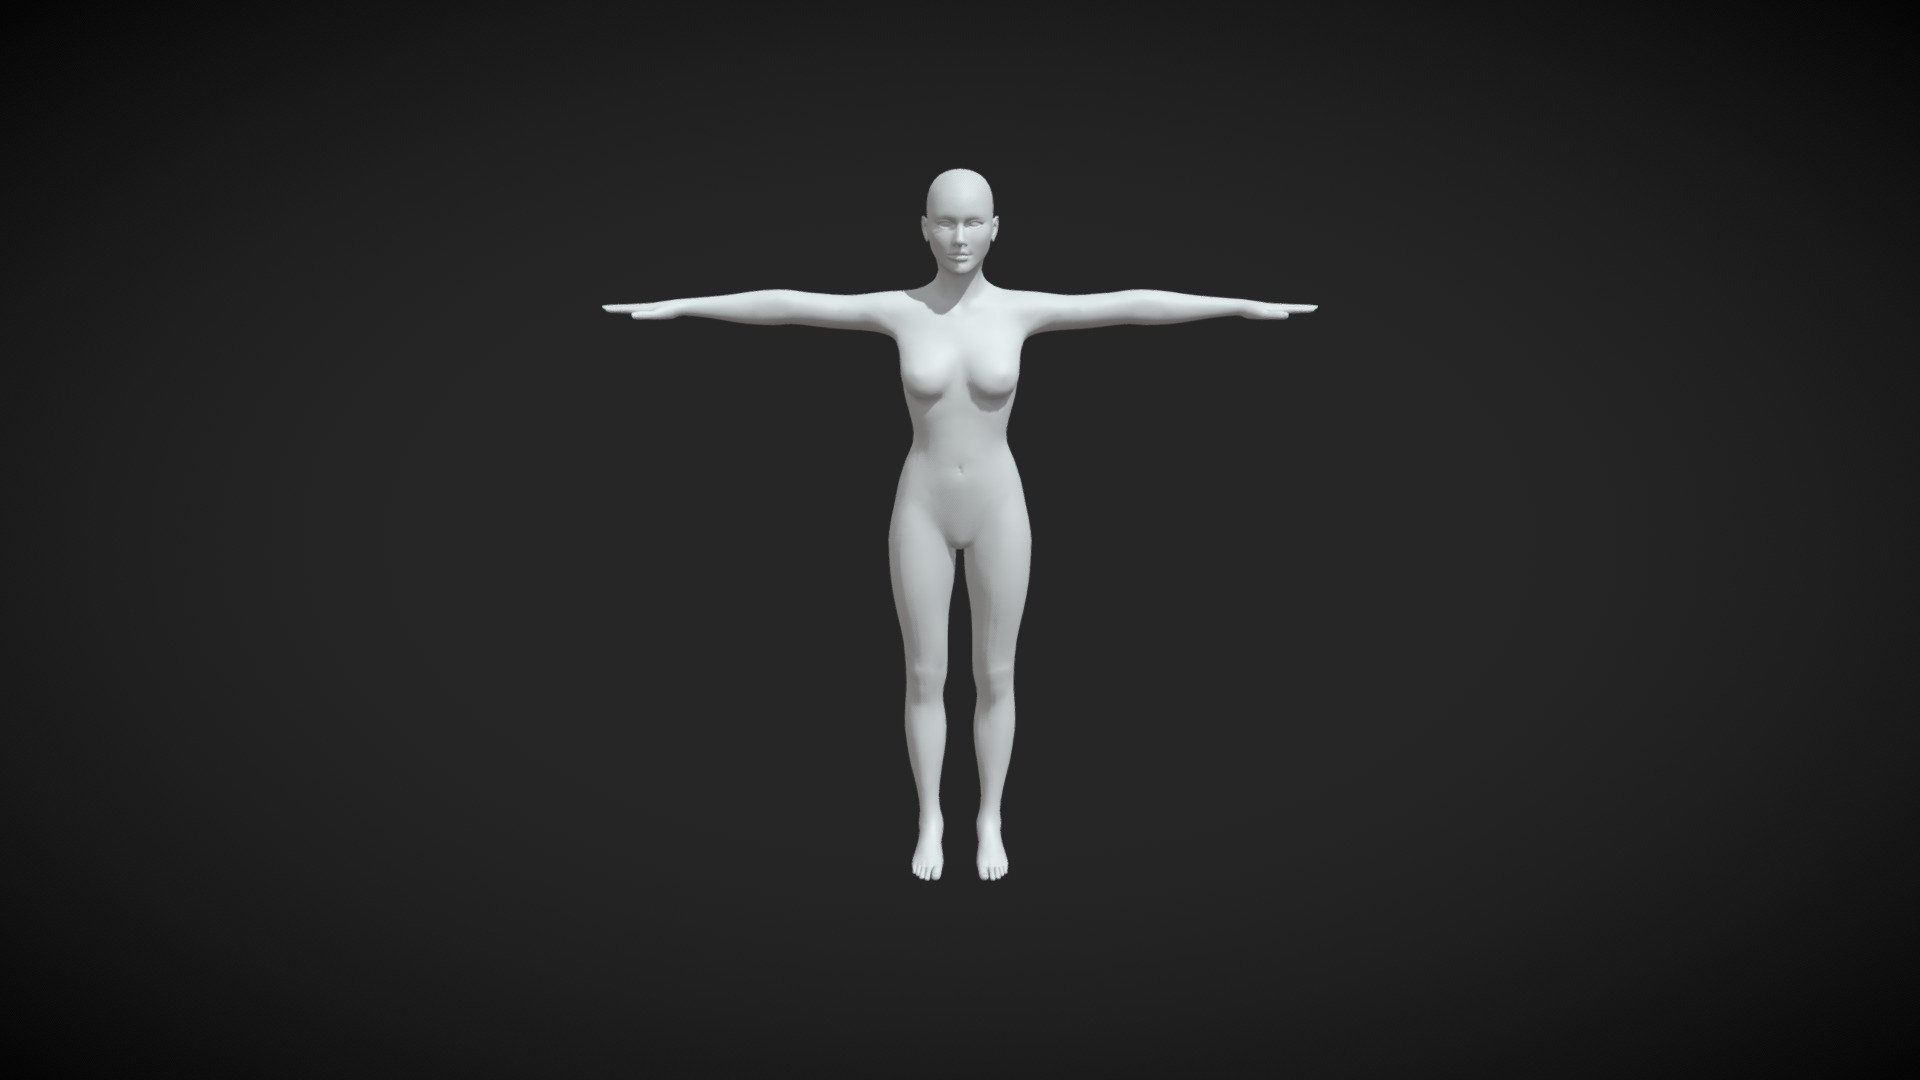 Introducing our Women Body Base Mesh in T-Pose 3D model – the essential starting point for your character design projects! 👩💻 Crafted with meticulous detail and anatomical accuracy, this versatile mesh provides a solid foundation for character modeling, animation, and sculpting. Whether you're a professional 3D artist, an aspiring animator, or a game developer, our Women Body Base Mesh in T-Pose offers the flexibility and realism you need to bring your characters to life. Download now and unleash your creativity! #WomenBody #BaseMesh #Tpose #3DModeling #CharacterDesign #DigitalArt - Women Body Base Mesh T-Pose - Buy Royalty Free 3D model by Sujit Mishra (@sujitanshumishra) 3d model